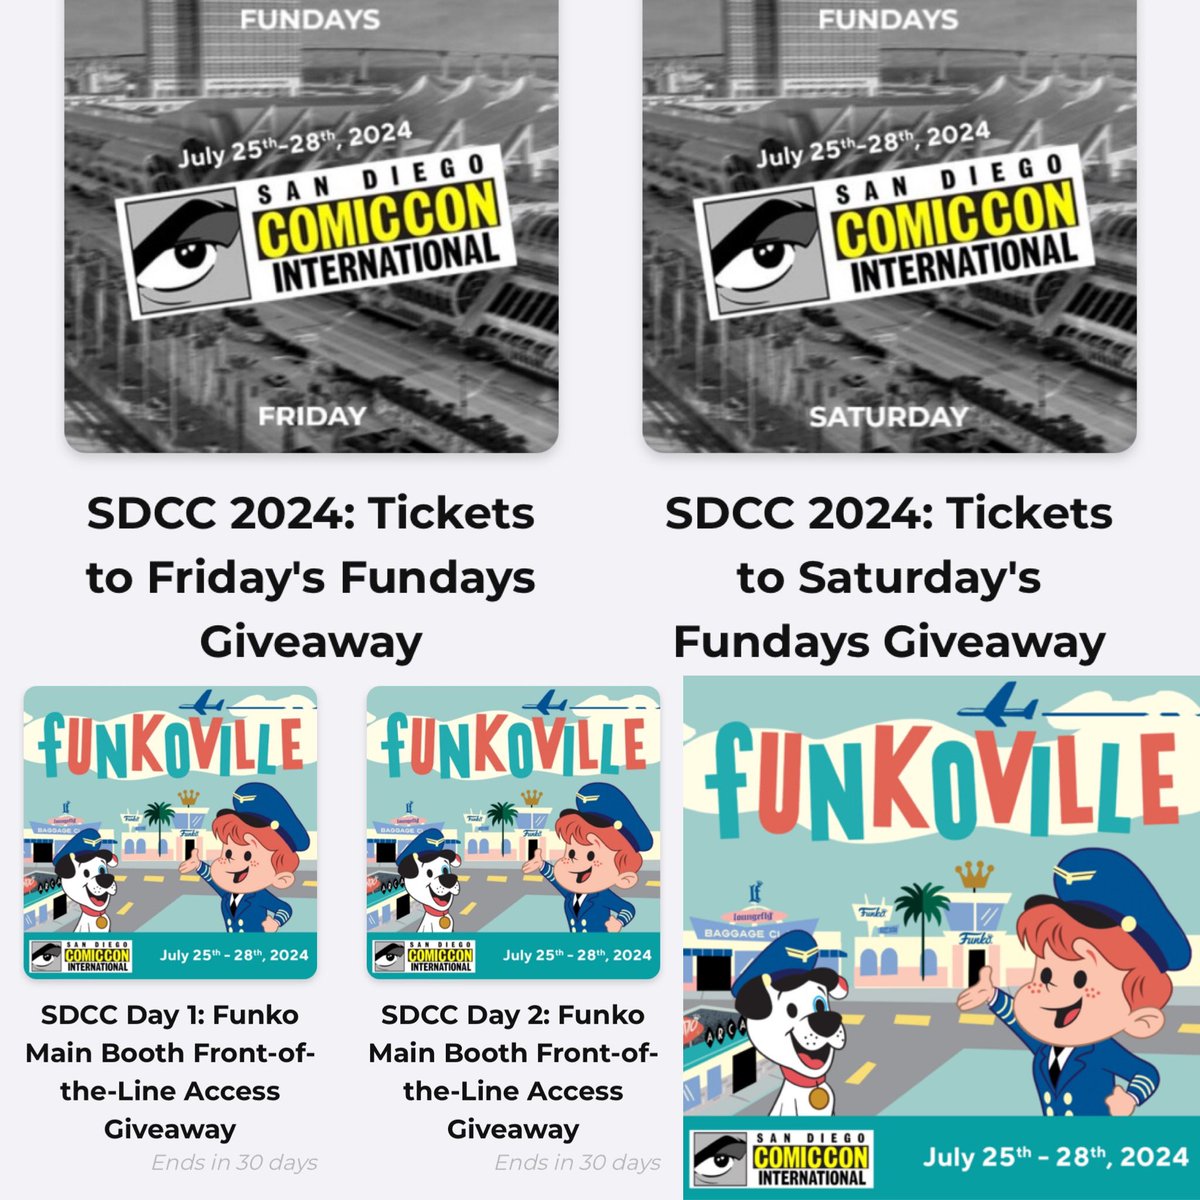 Funko Fundays is confirmed for Friday and Saturday during SDCC! You can now enter the giveaways for Fundays and Funko booth at Fan Rewards!
.
funko.com/fanrewards/?ta…
.
#Funko #FunkoPop #FunkoPopVinyl #Pop #PopVinyl #Collectibles #Collectible #FunkoCollector #FunkoPops #Collector